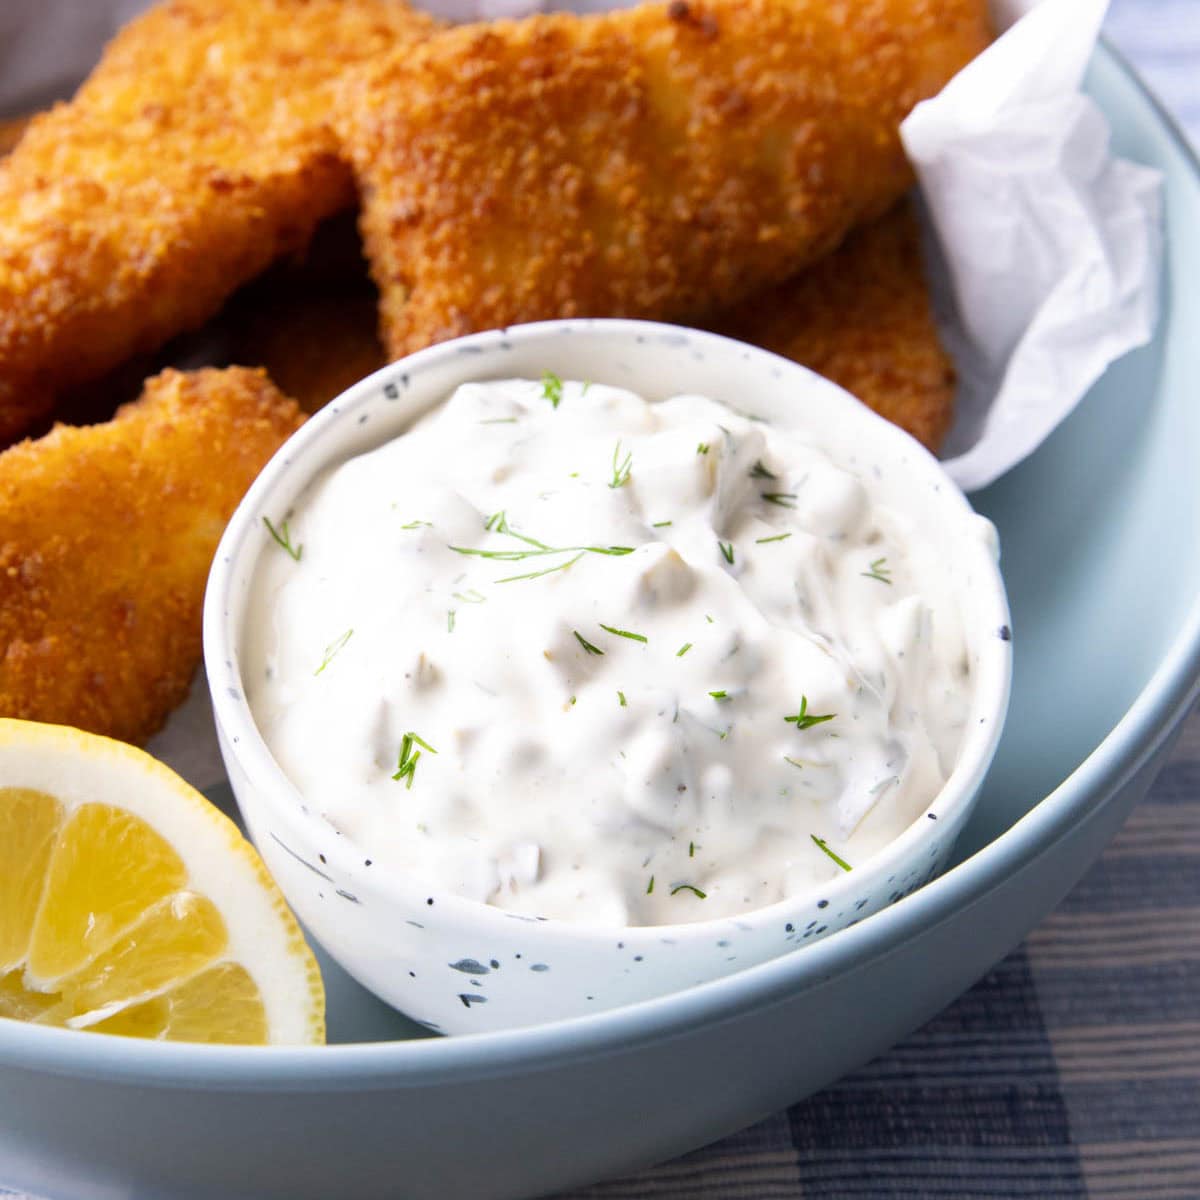 This tartar sauce is thick and creamy served in a dip bowl with fried fish sticks and a lemon wedge